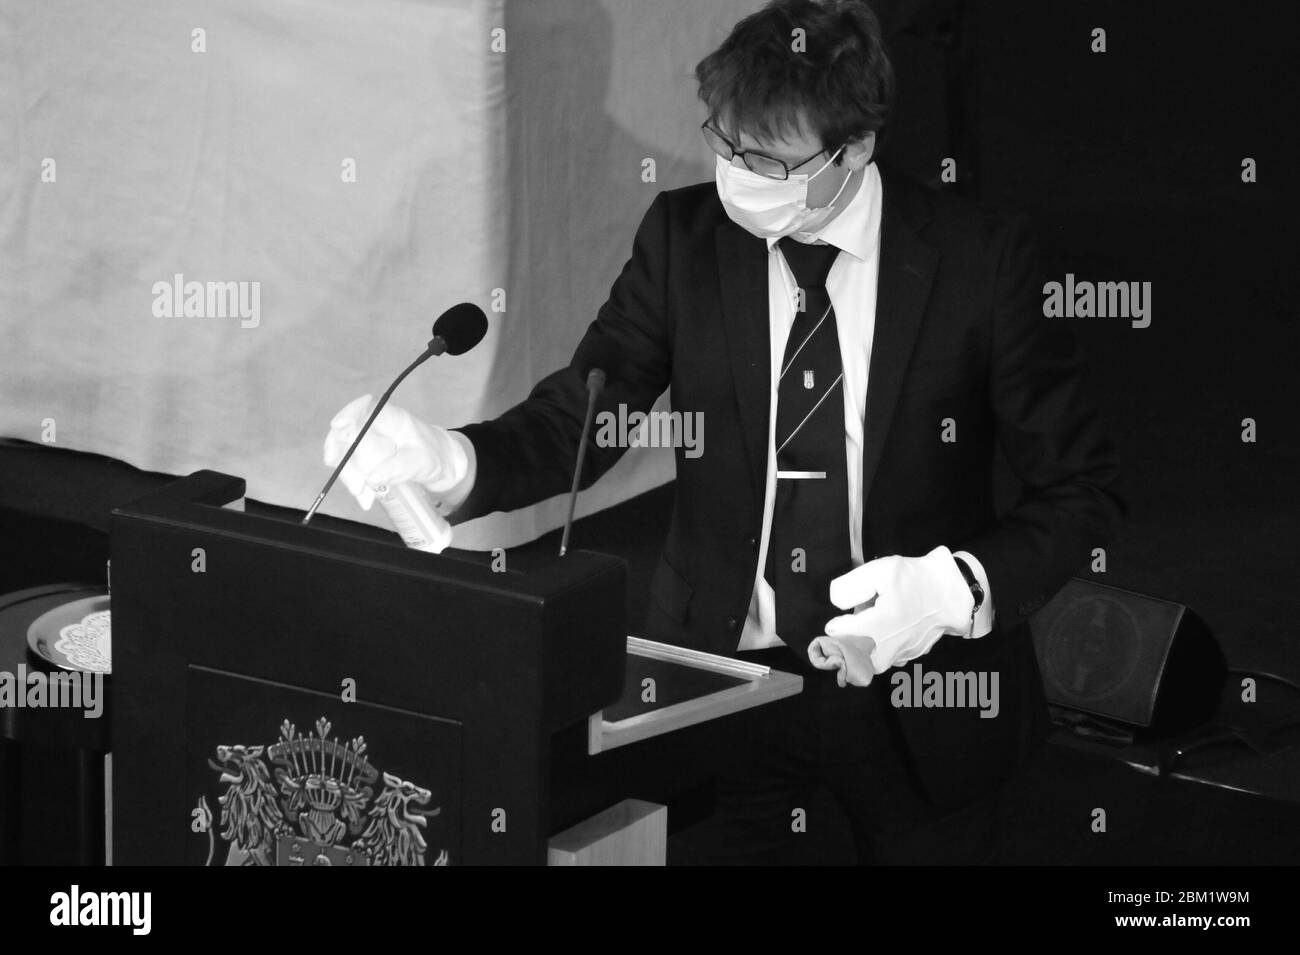 Hamburg citizenship plenary sitting at 06. May 2020 in the City Hall. Cleaning the lectern for the speakers of the different political groups, who are talking about solutions of the Corona crisis in Hamburg. Stock Photo